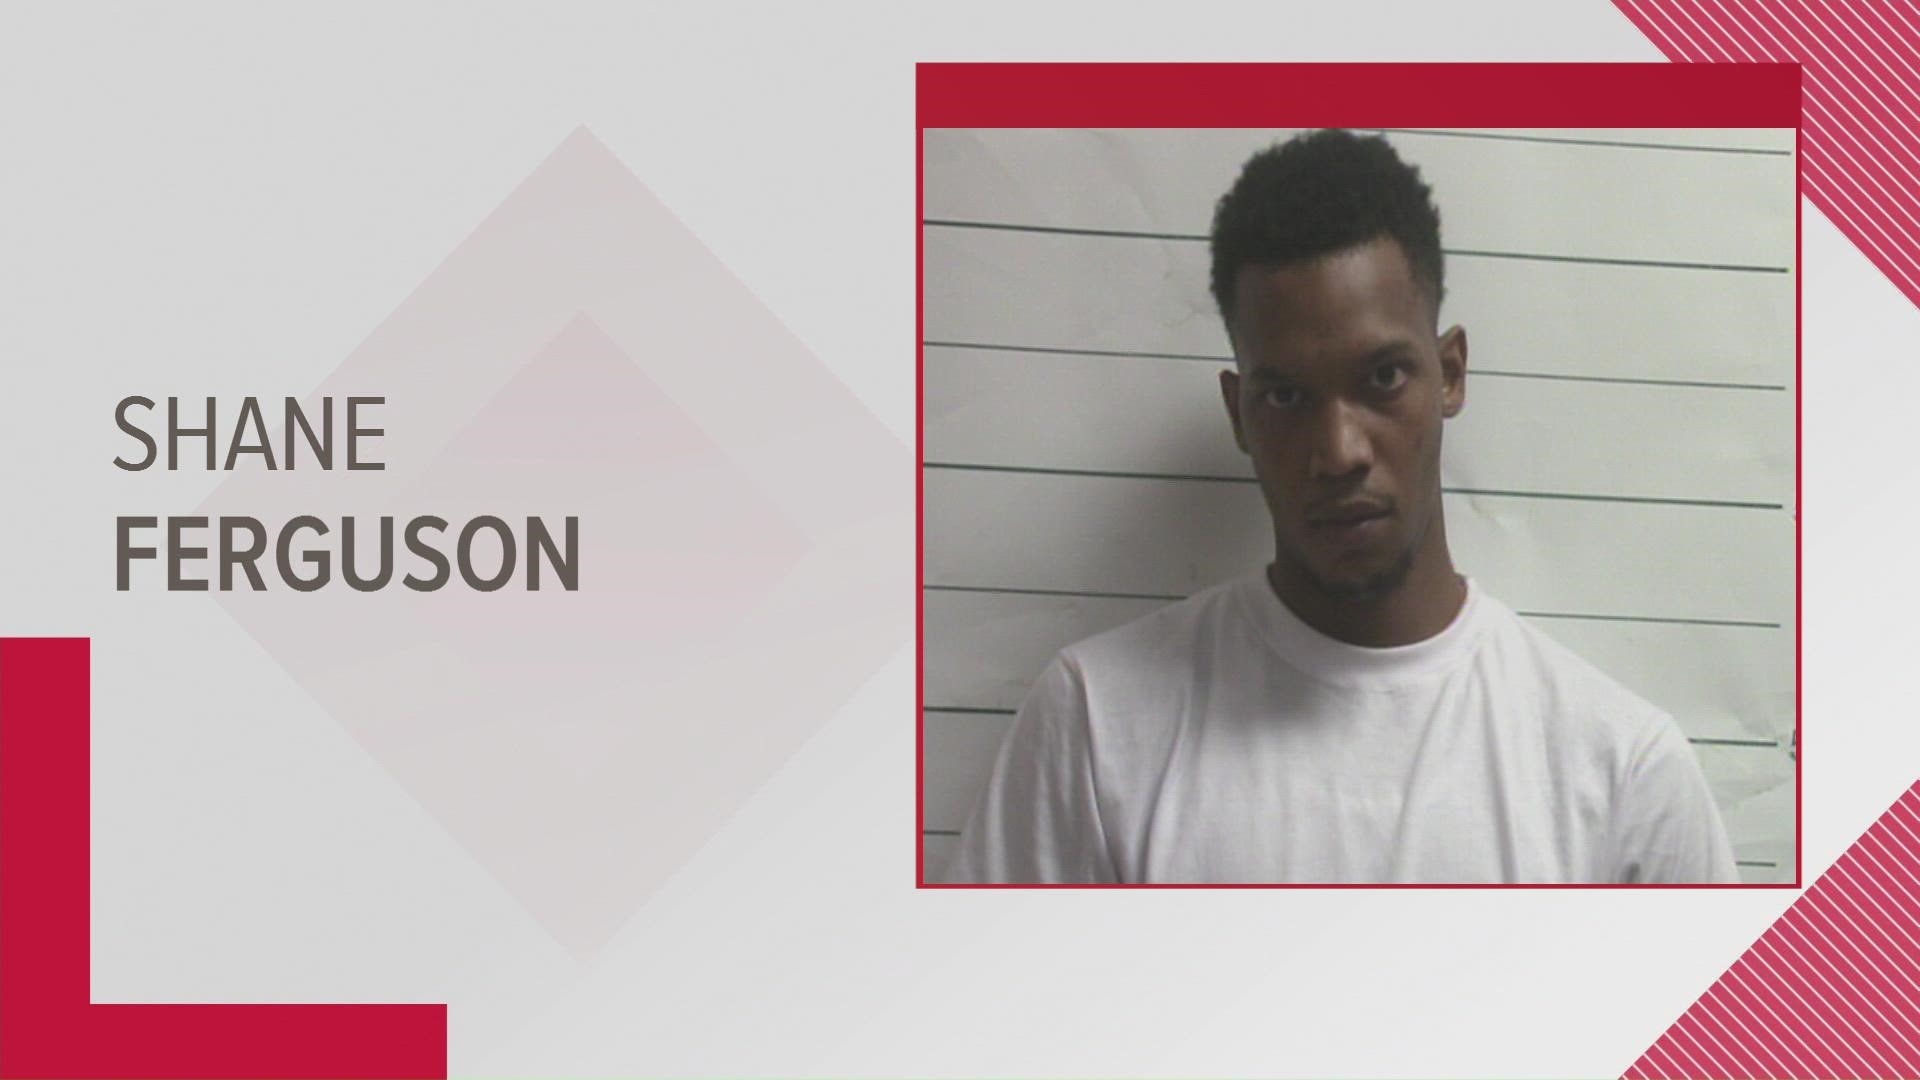 The son of NOPD Superintendant Shaun Ferguson, Shane Ferguson, has been arrested for charges of battery of a police officer.